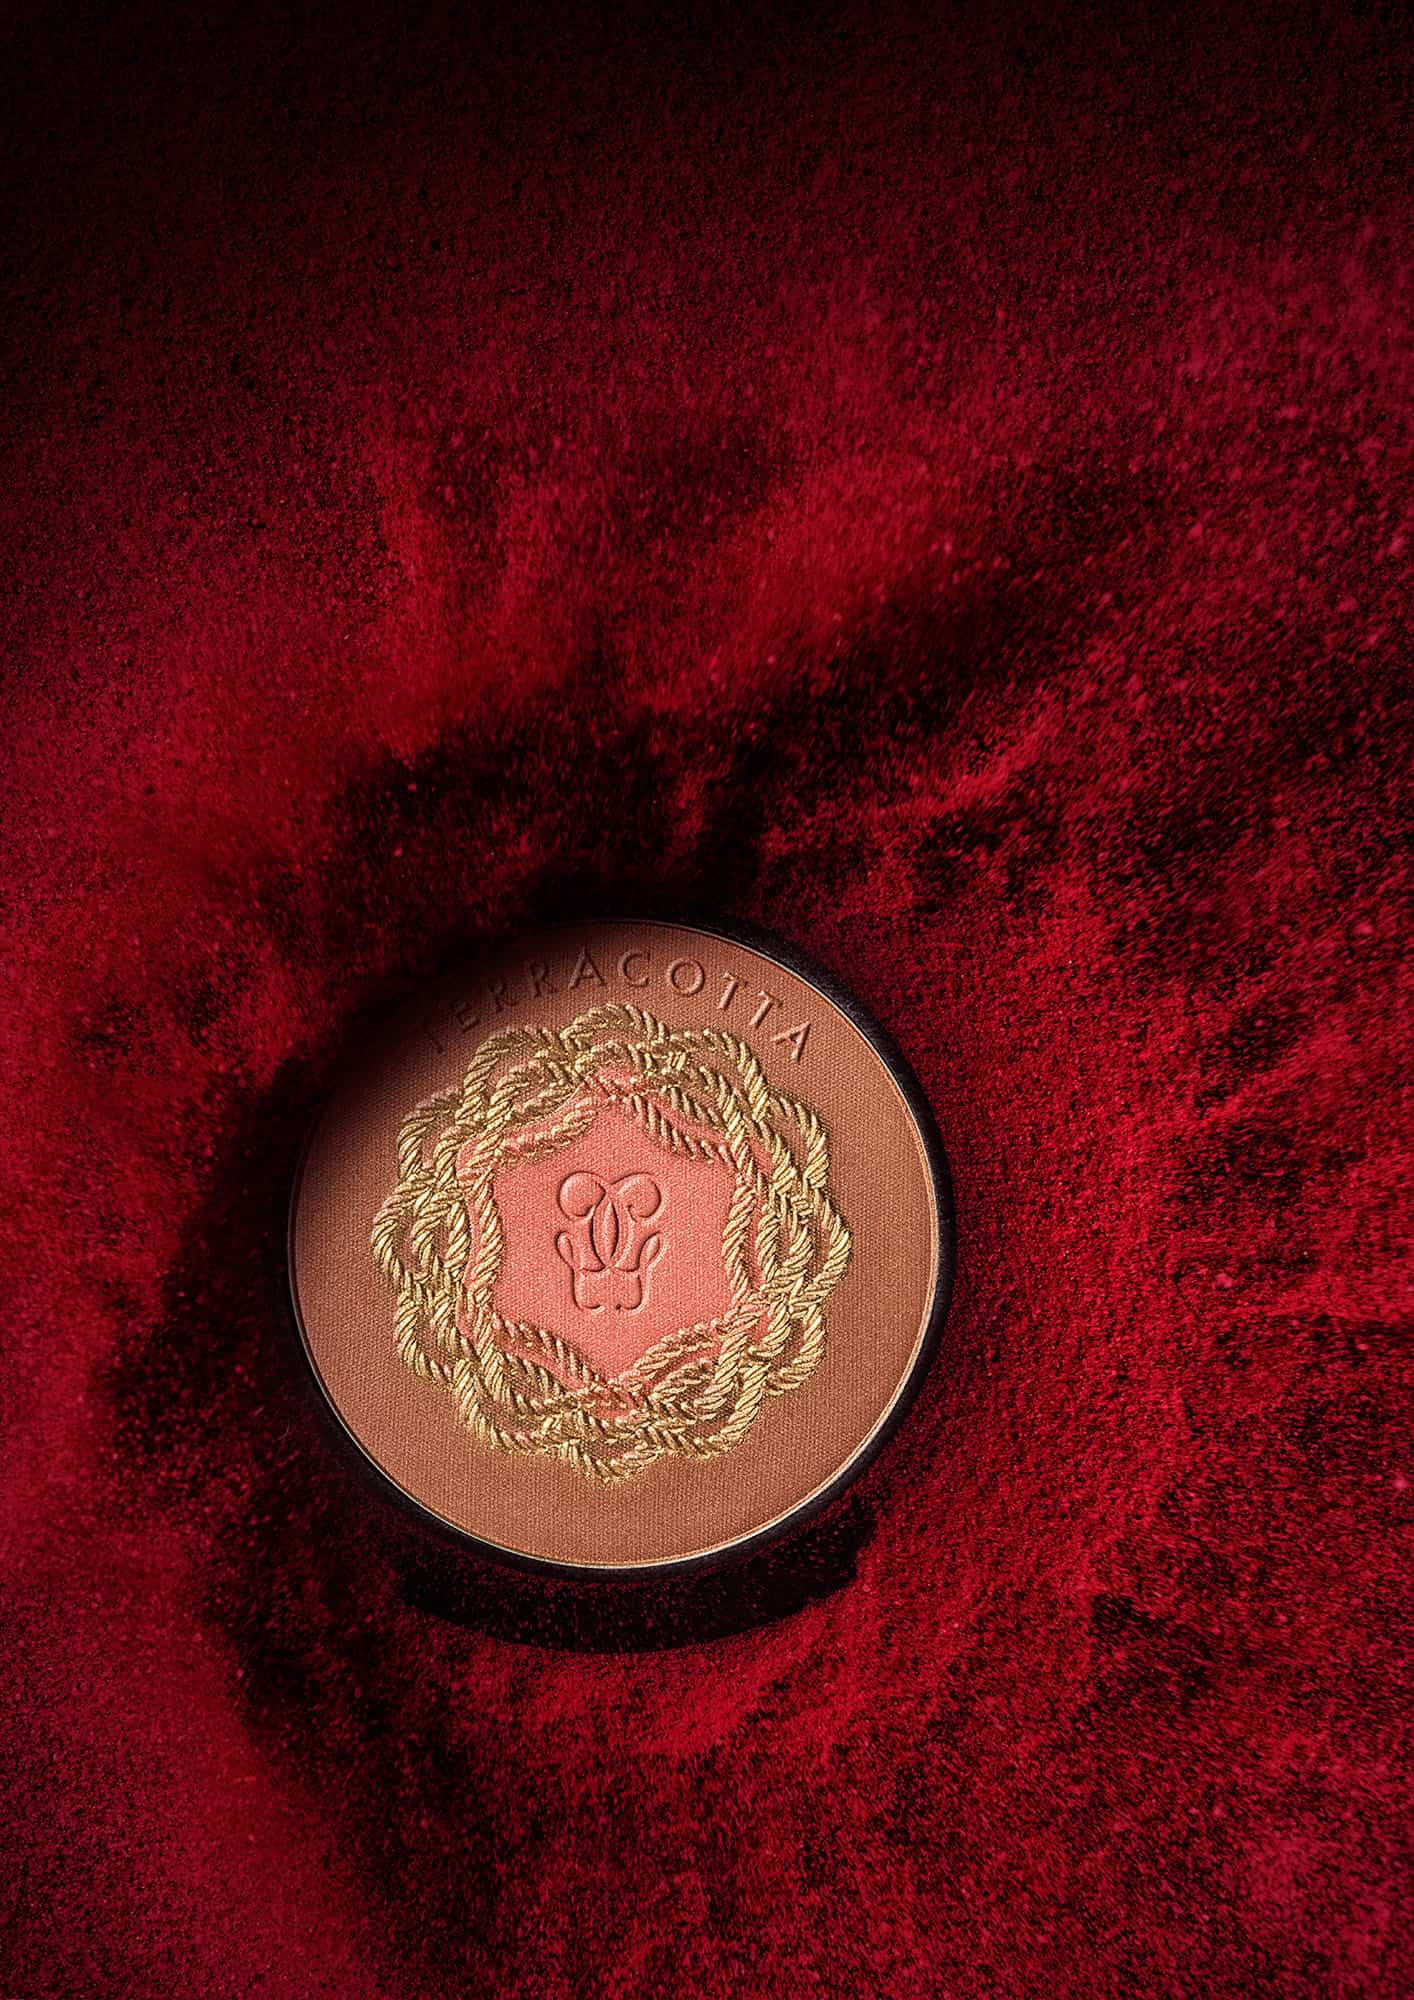 Guerlain - Terracotta Bronzer on a Bed of Red Powder